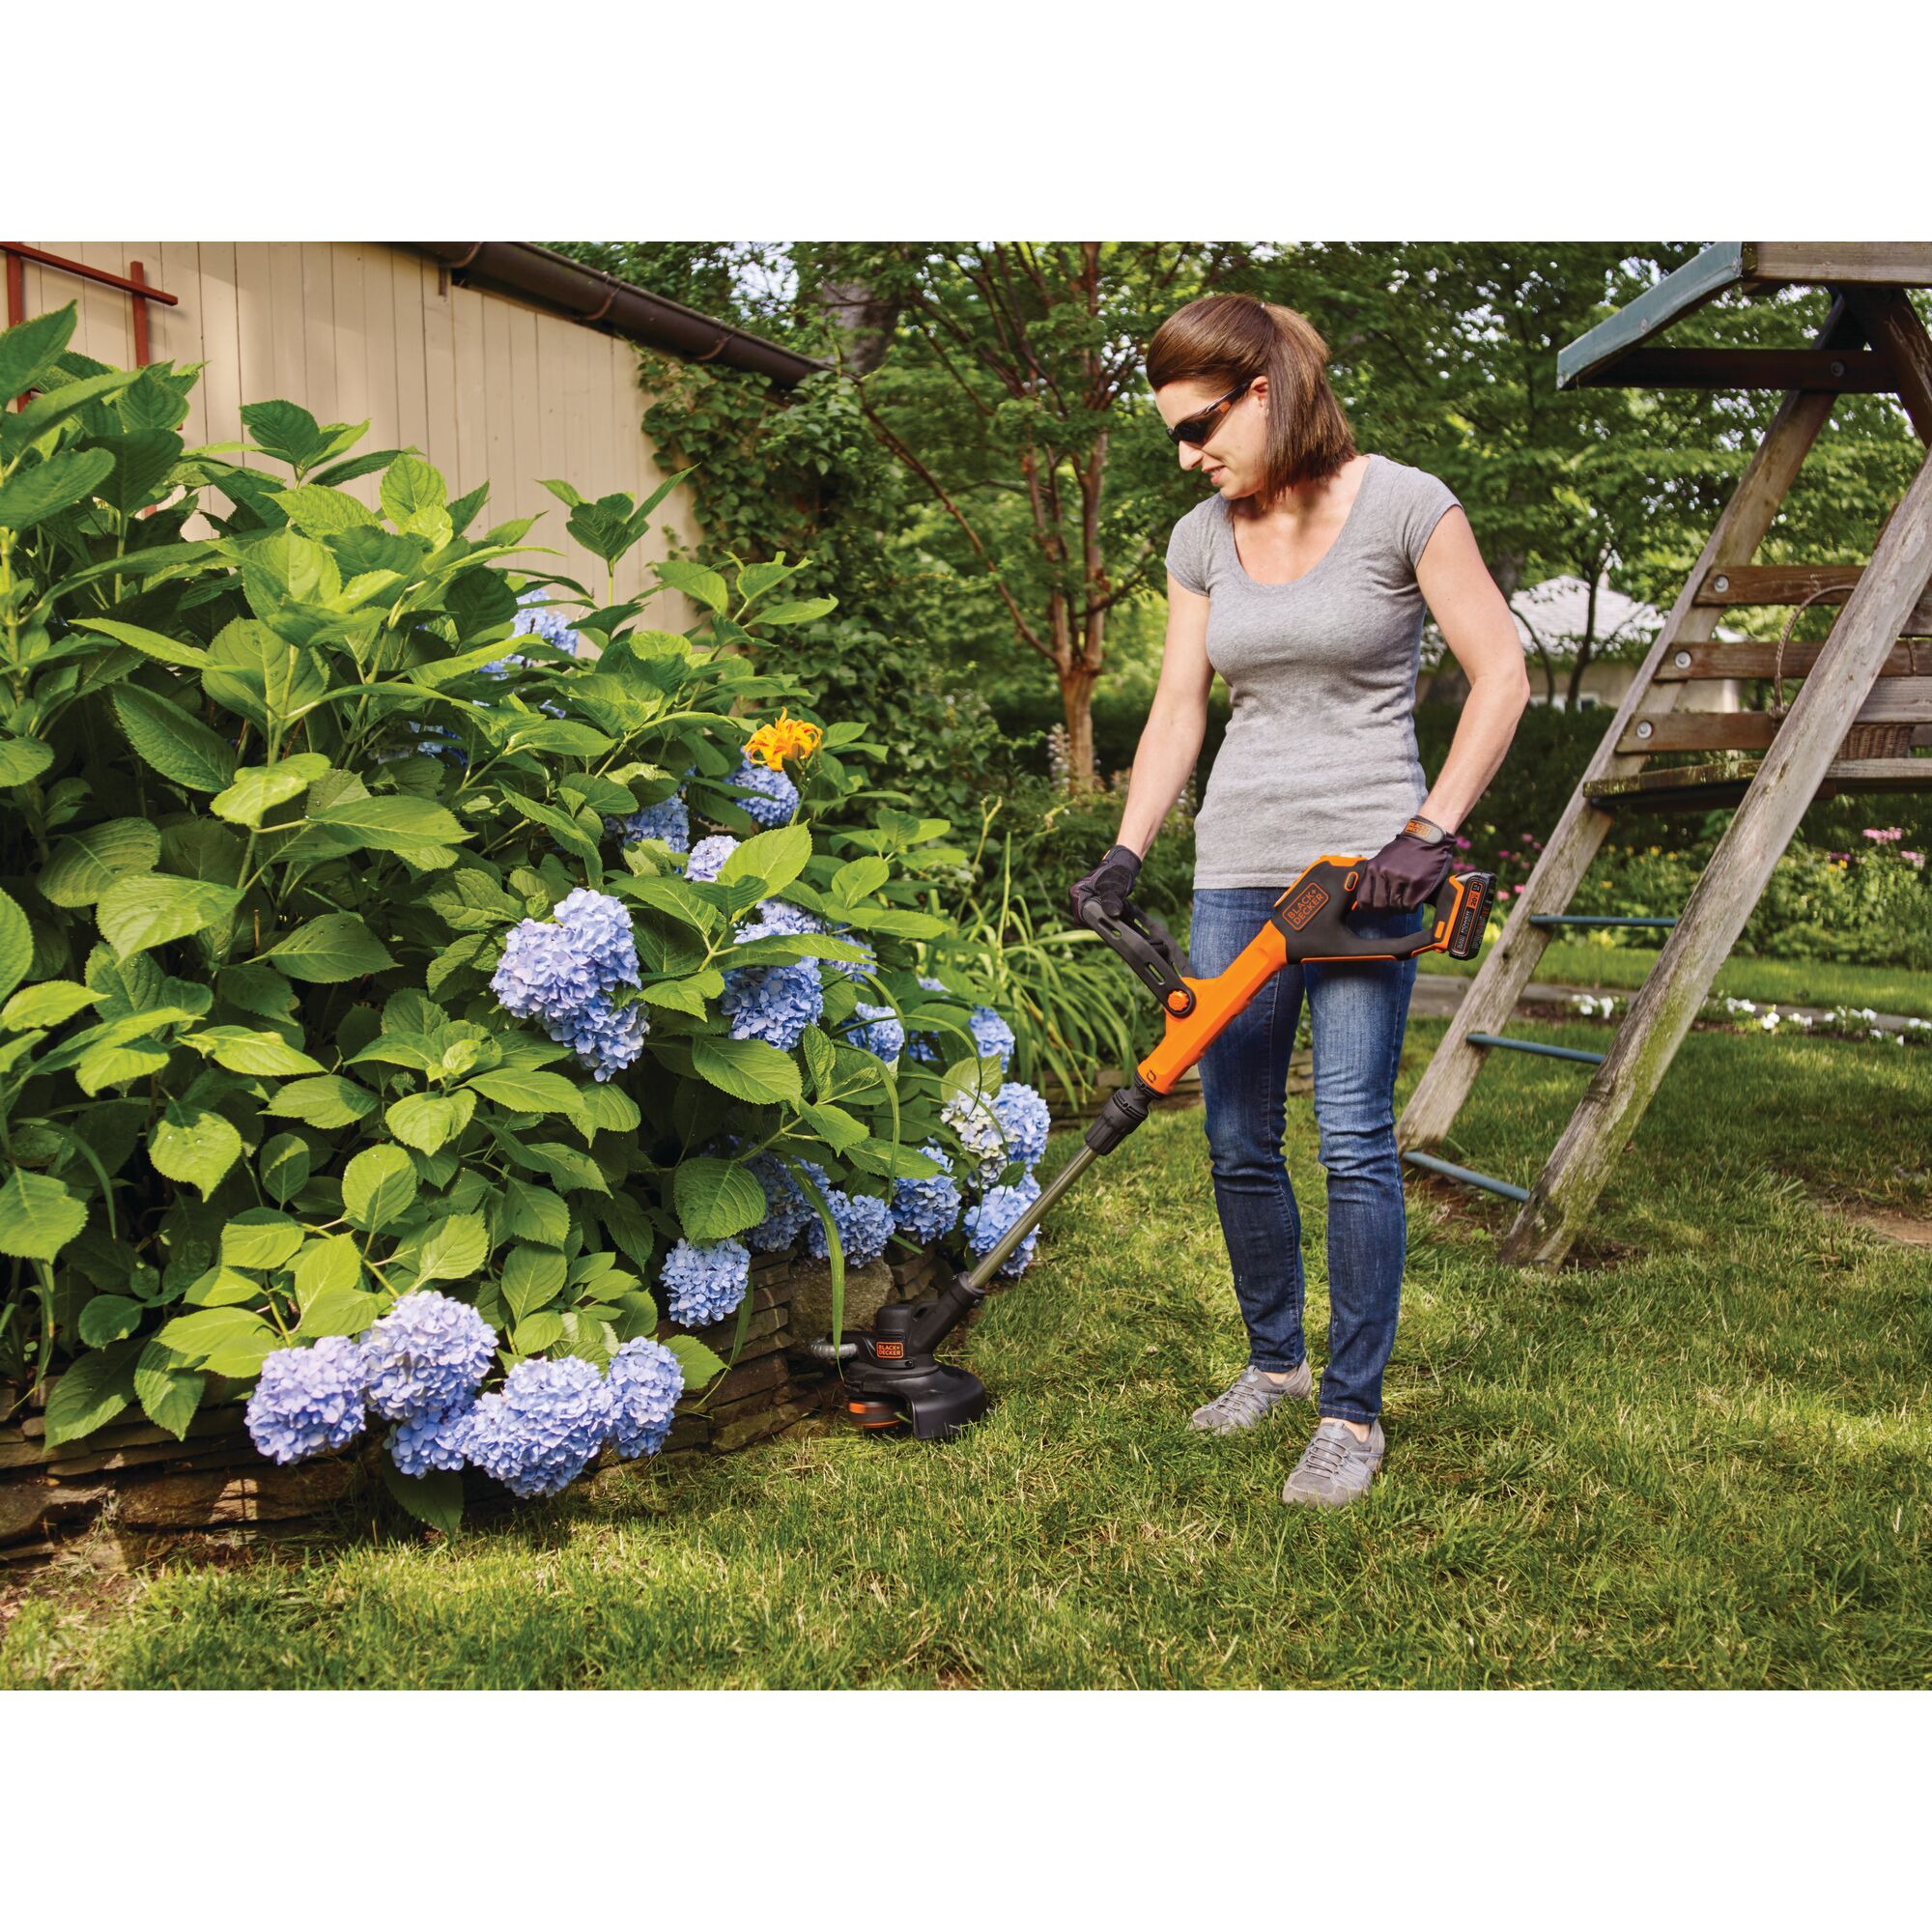 Woman using 20V Max Lithium Easyfeed string Trimmer/Edger near garden and playset.